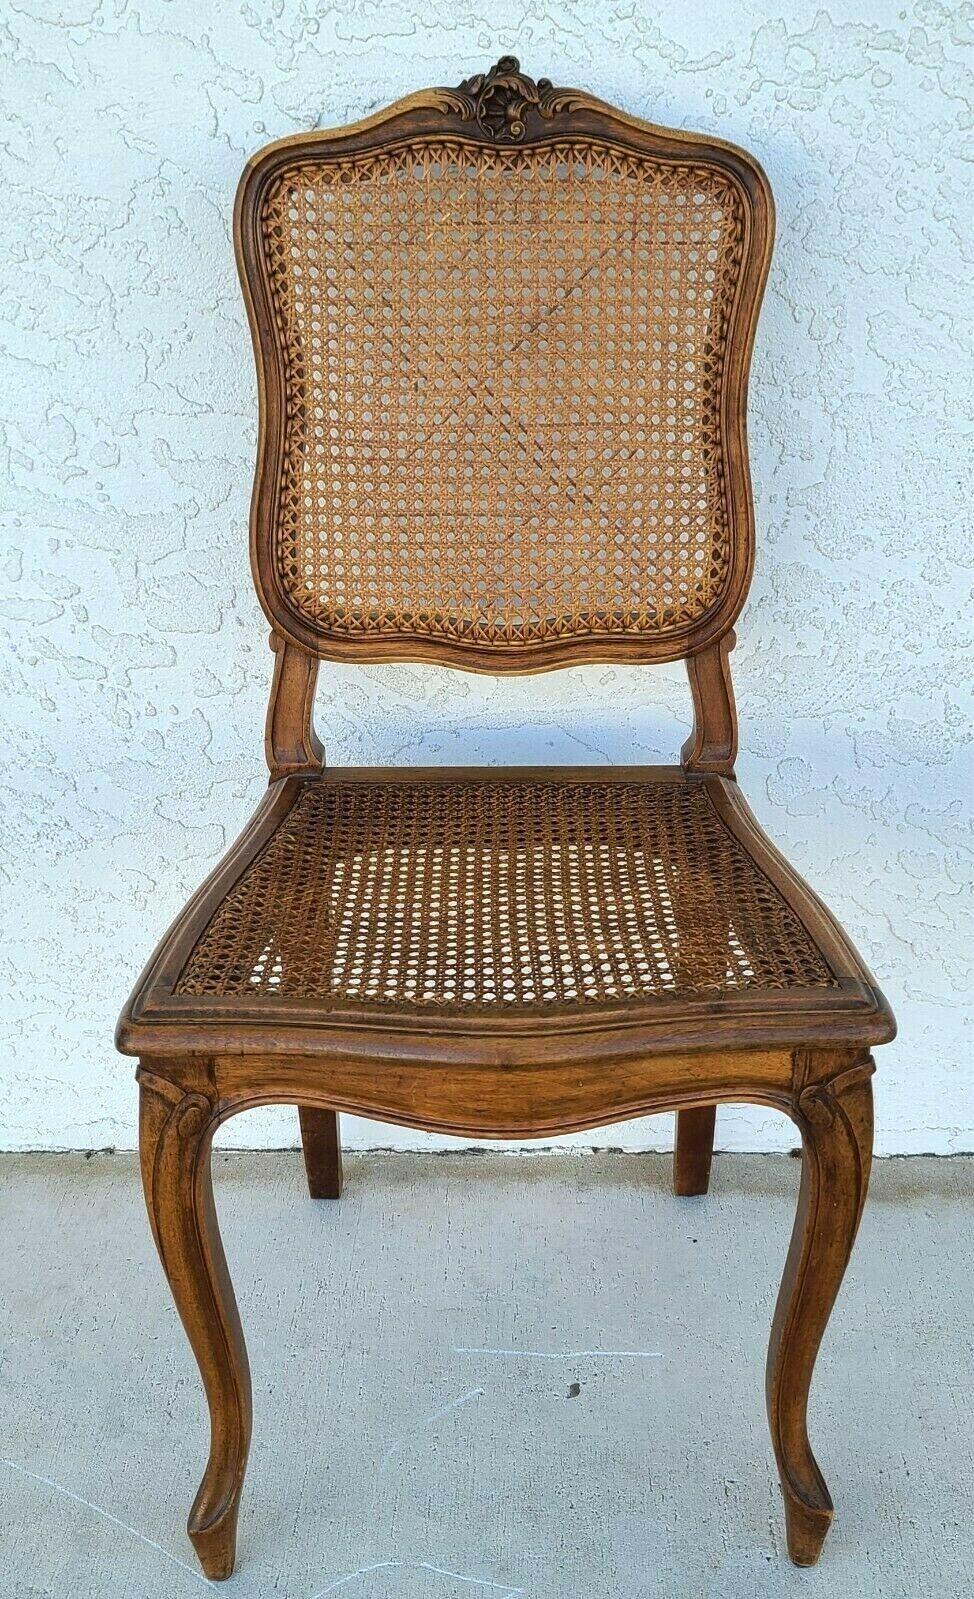 Offering one of our recent palm beach estate fine furniture acquisitions of a
Antique c 1930's Petite French Provincial walnut cane accent desk vanity dining chair

Approximate measurements in inches
37